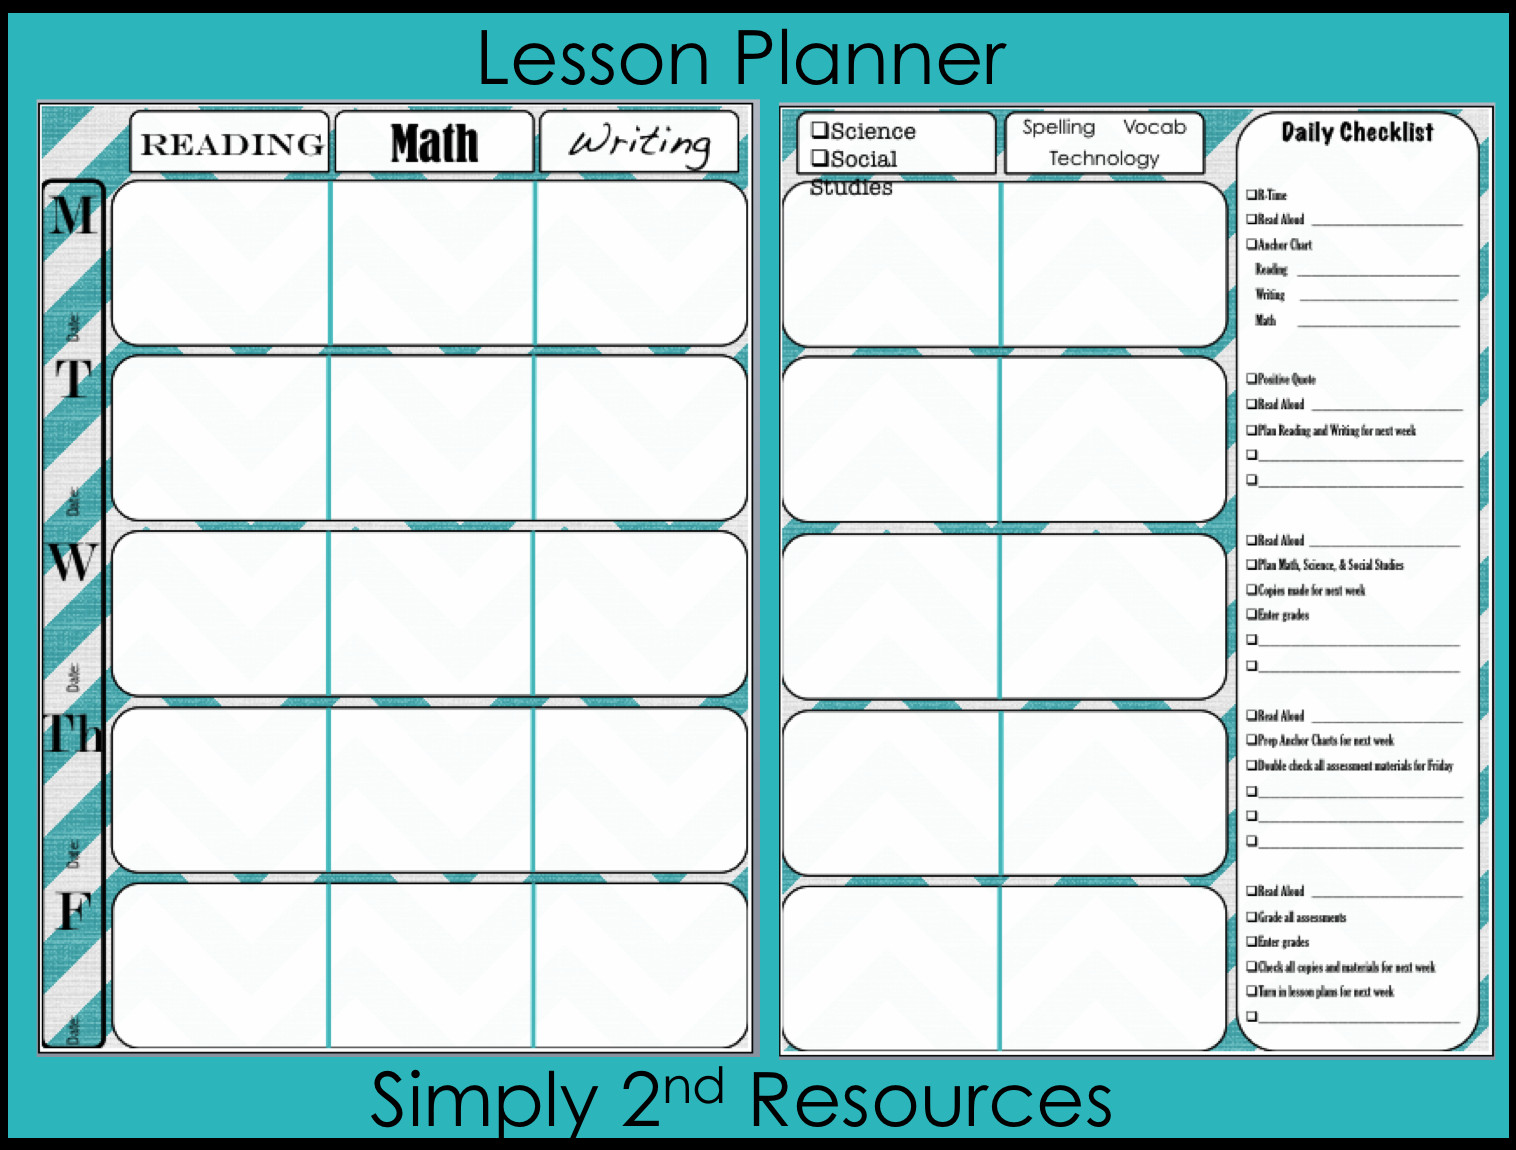 Free Printable Lesson Plans Simply 2nd Resources Lesson Plan Template so Excited to